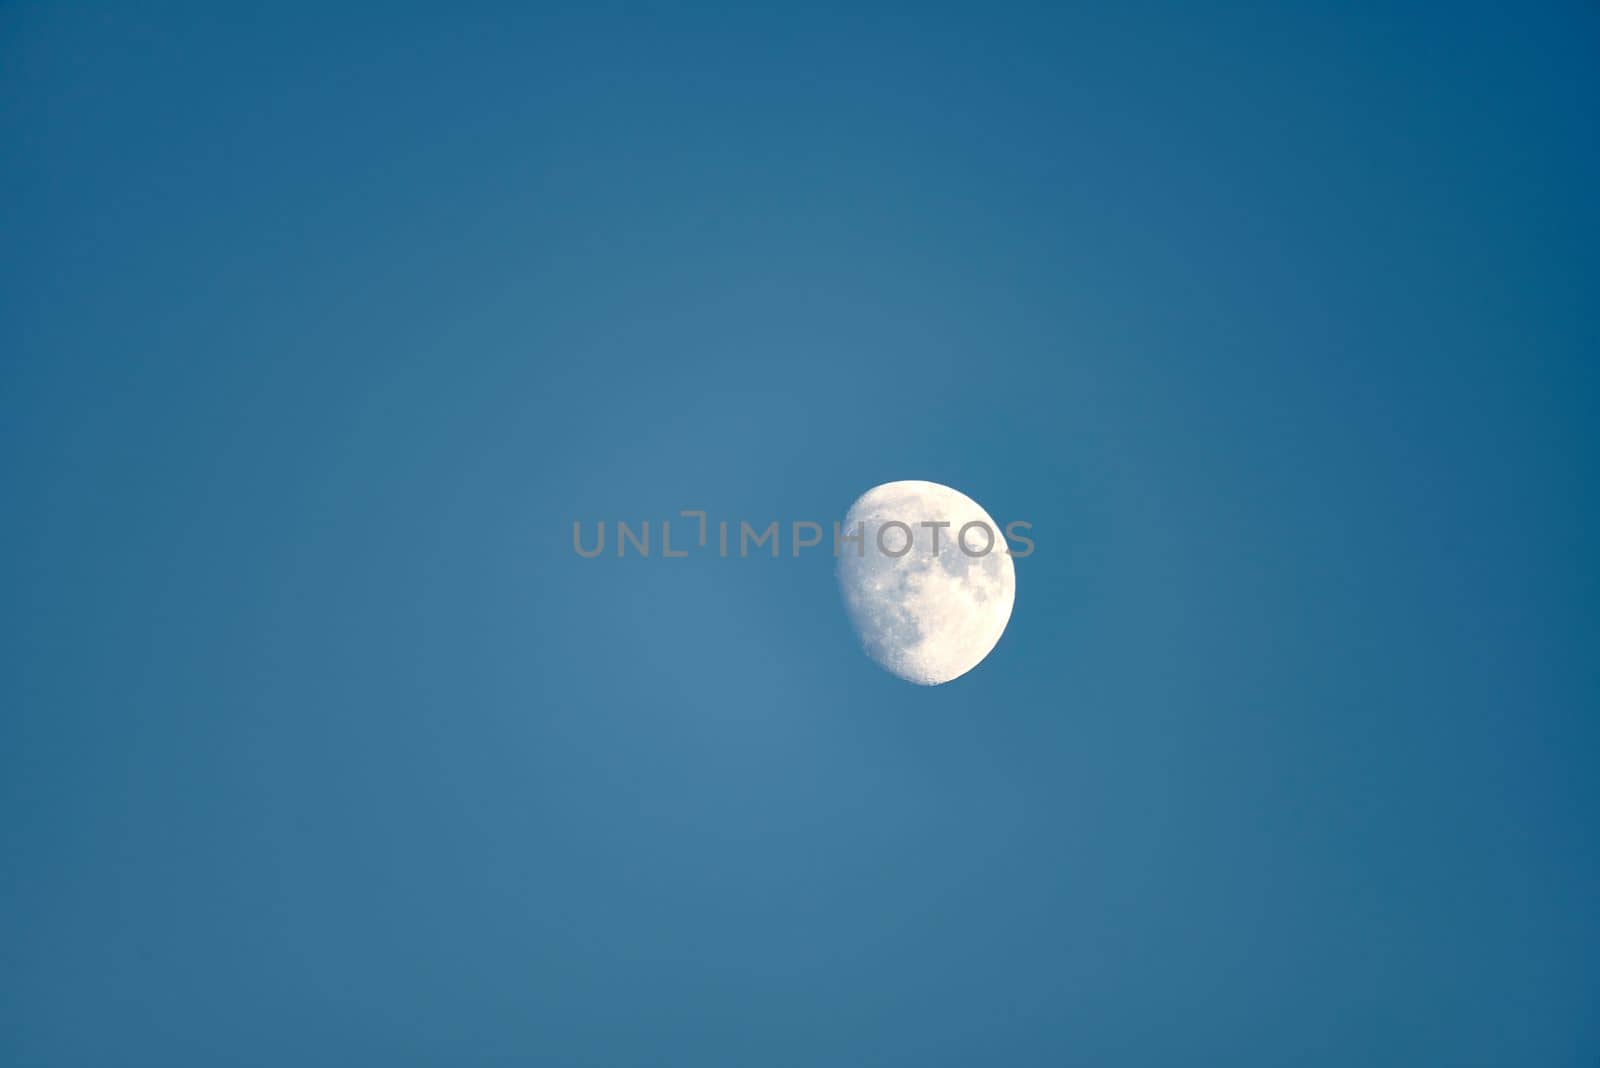 An almost full moon on a blue background by raul_ruiz